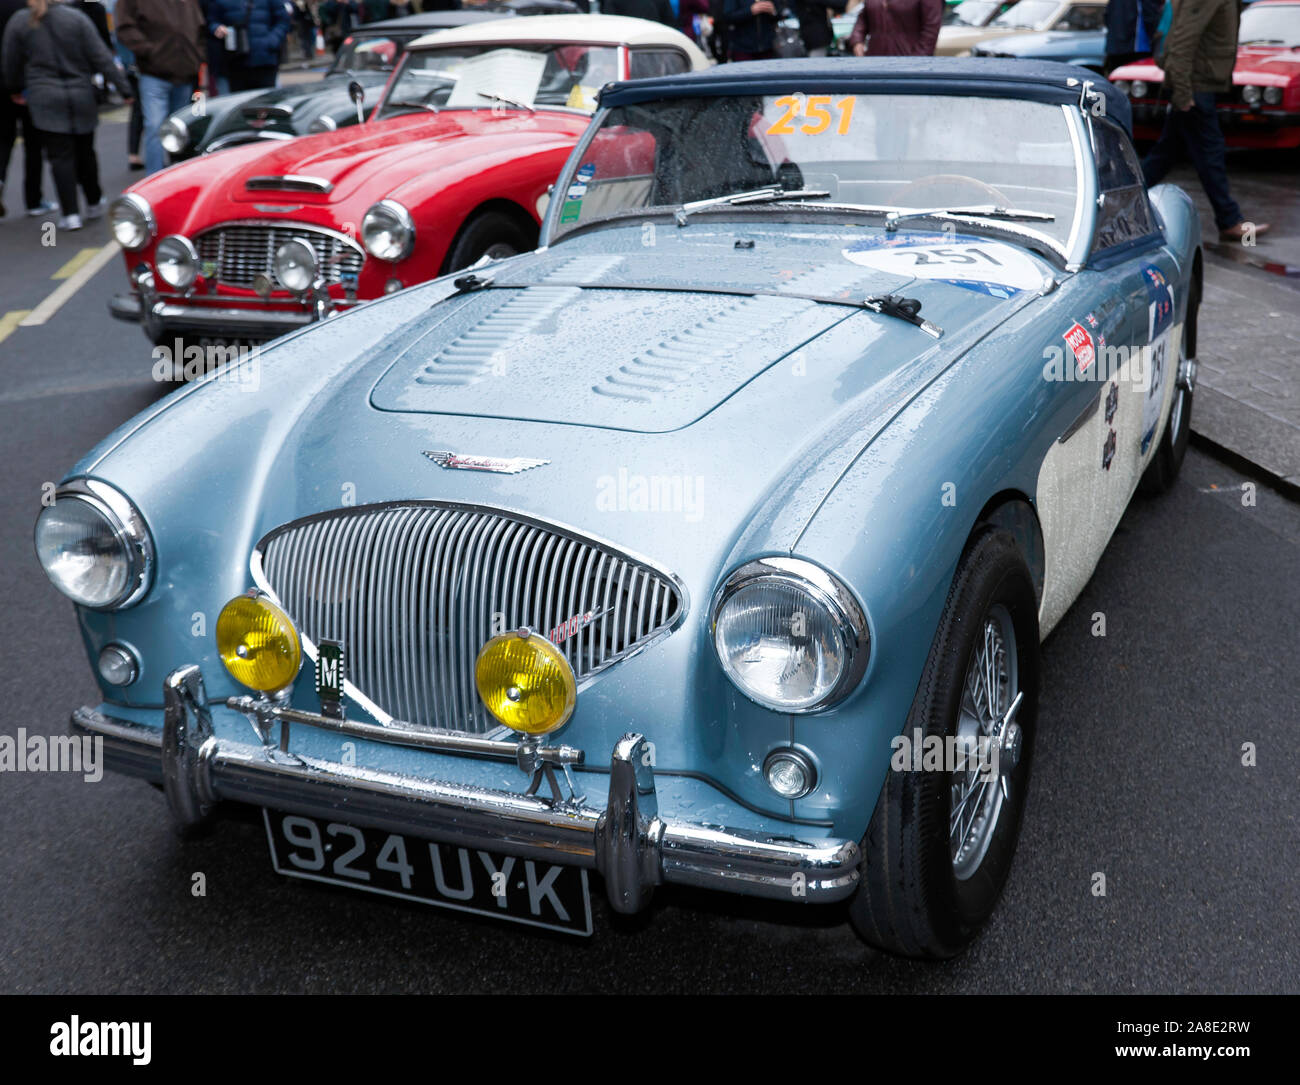 Three-quarters front view of a Blue, 1956, Austin Healey 100M, on display at the 2019 Regents Street Motor Show Stock Photo